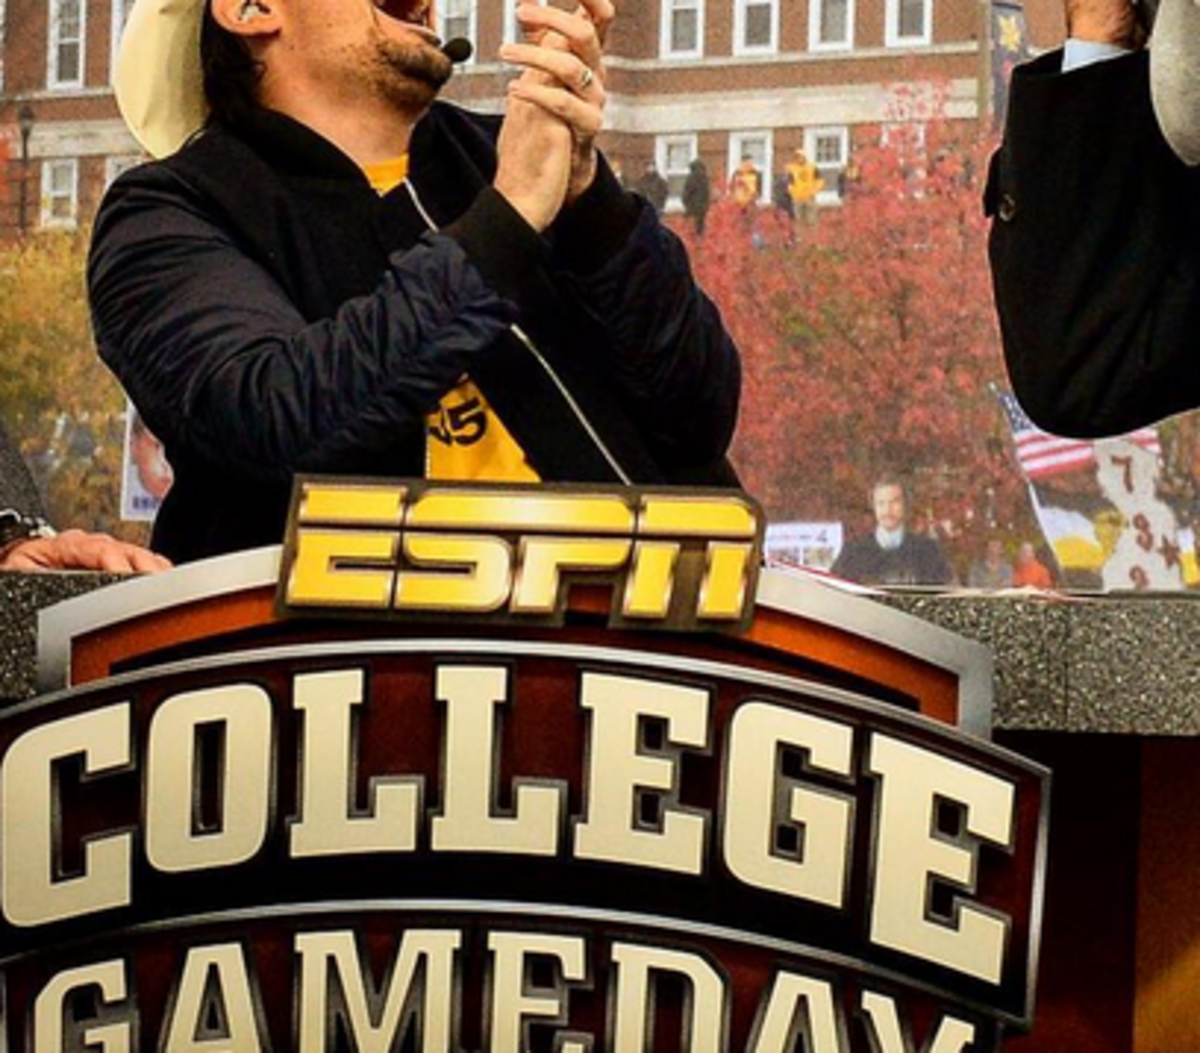 Brad Paisley on College Gameday as the guest picker.